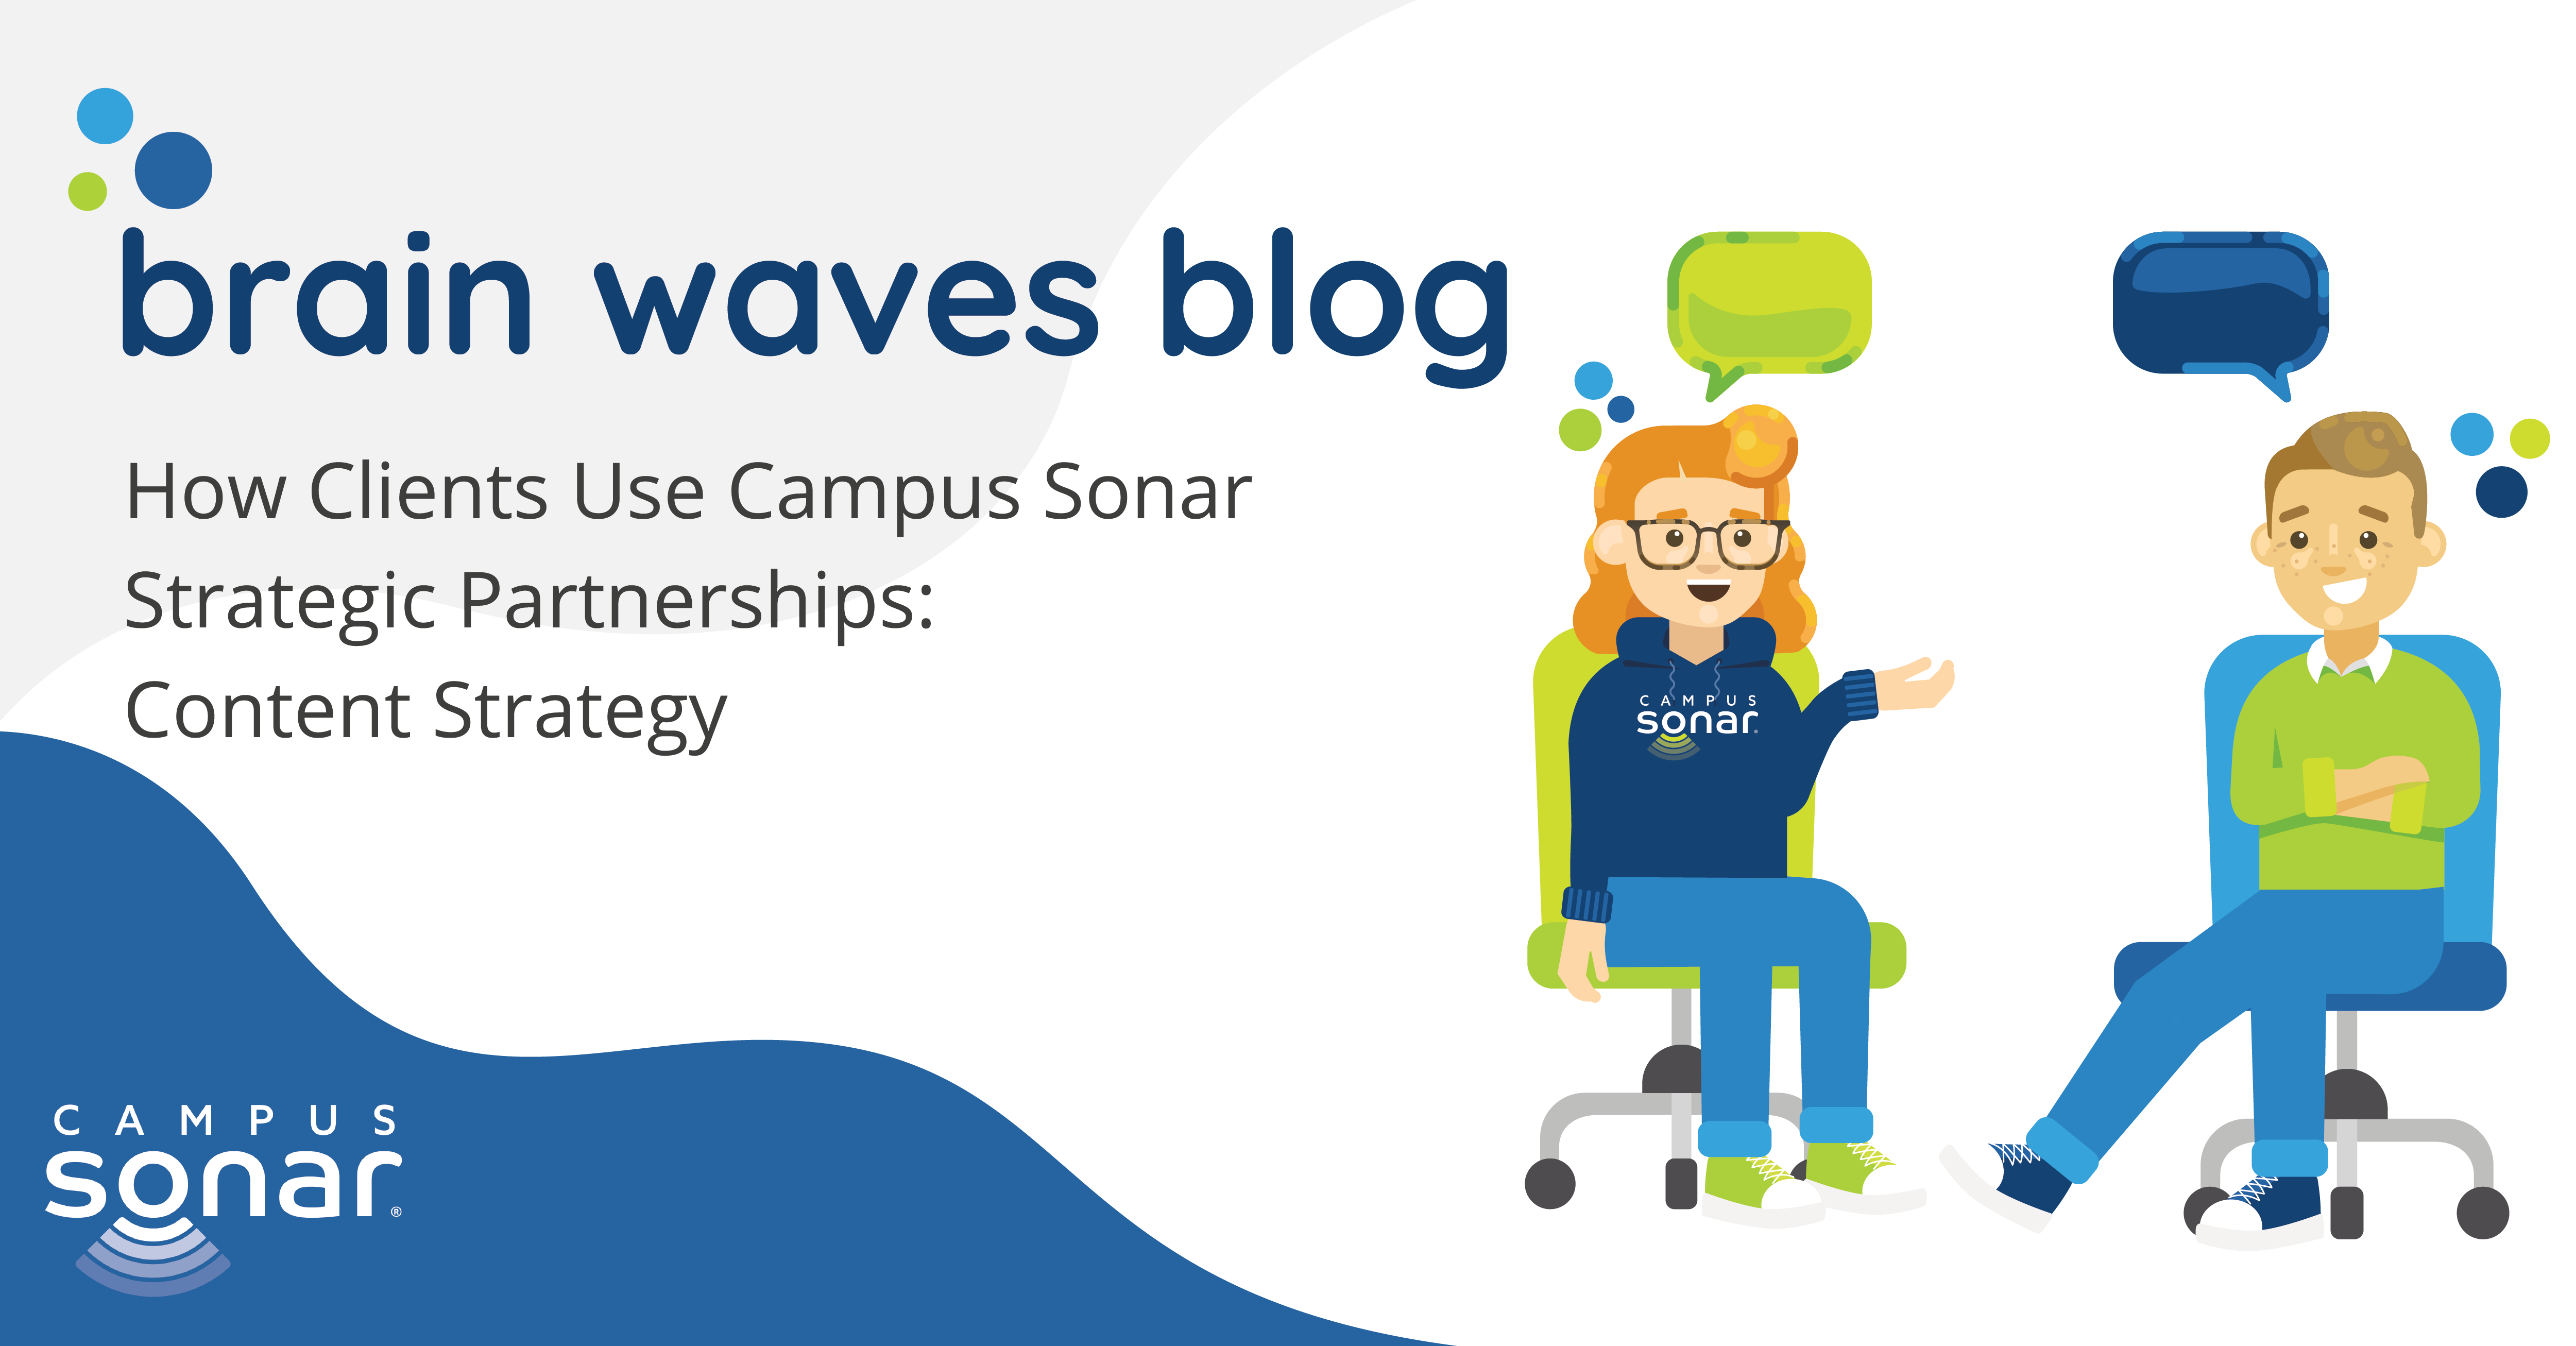 Brain Waves Blog How Clients Use Campus Sonar Strategic Partnerships: Content Strategy